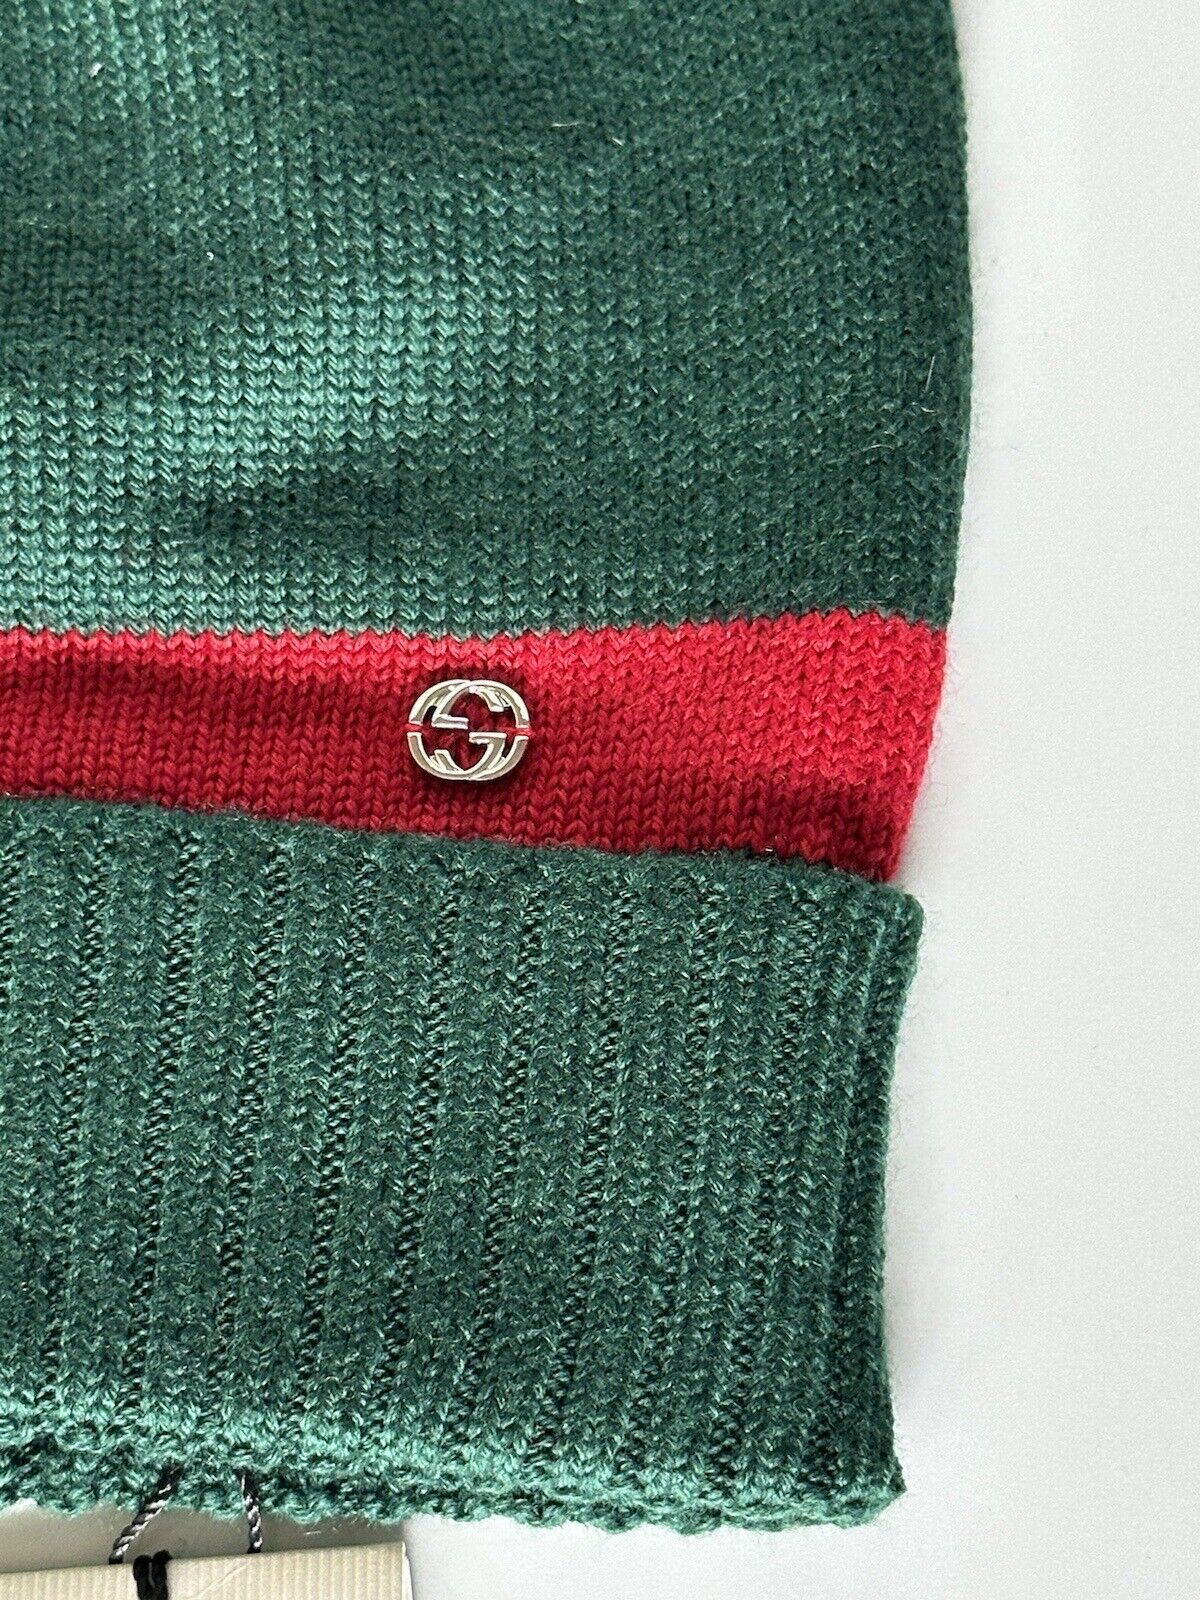 NWT Gucci Knit Wool Green/Red Beanie Hat Medium (58 cm) Made in Italy 494598